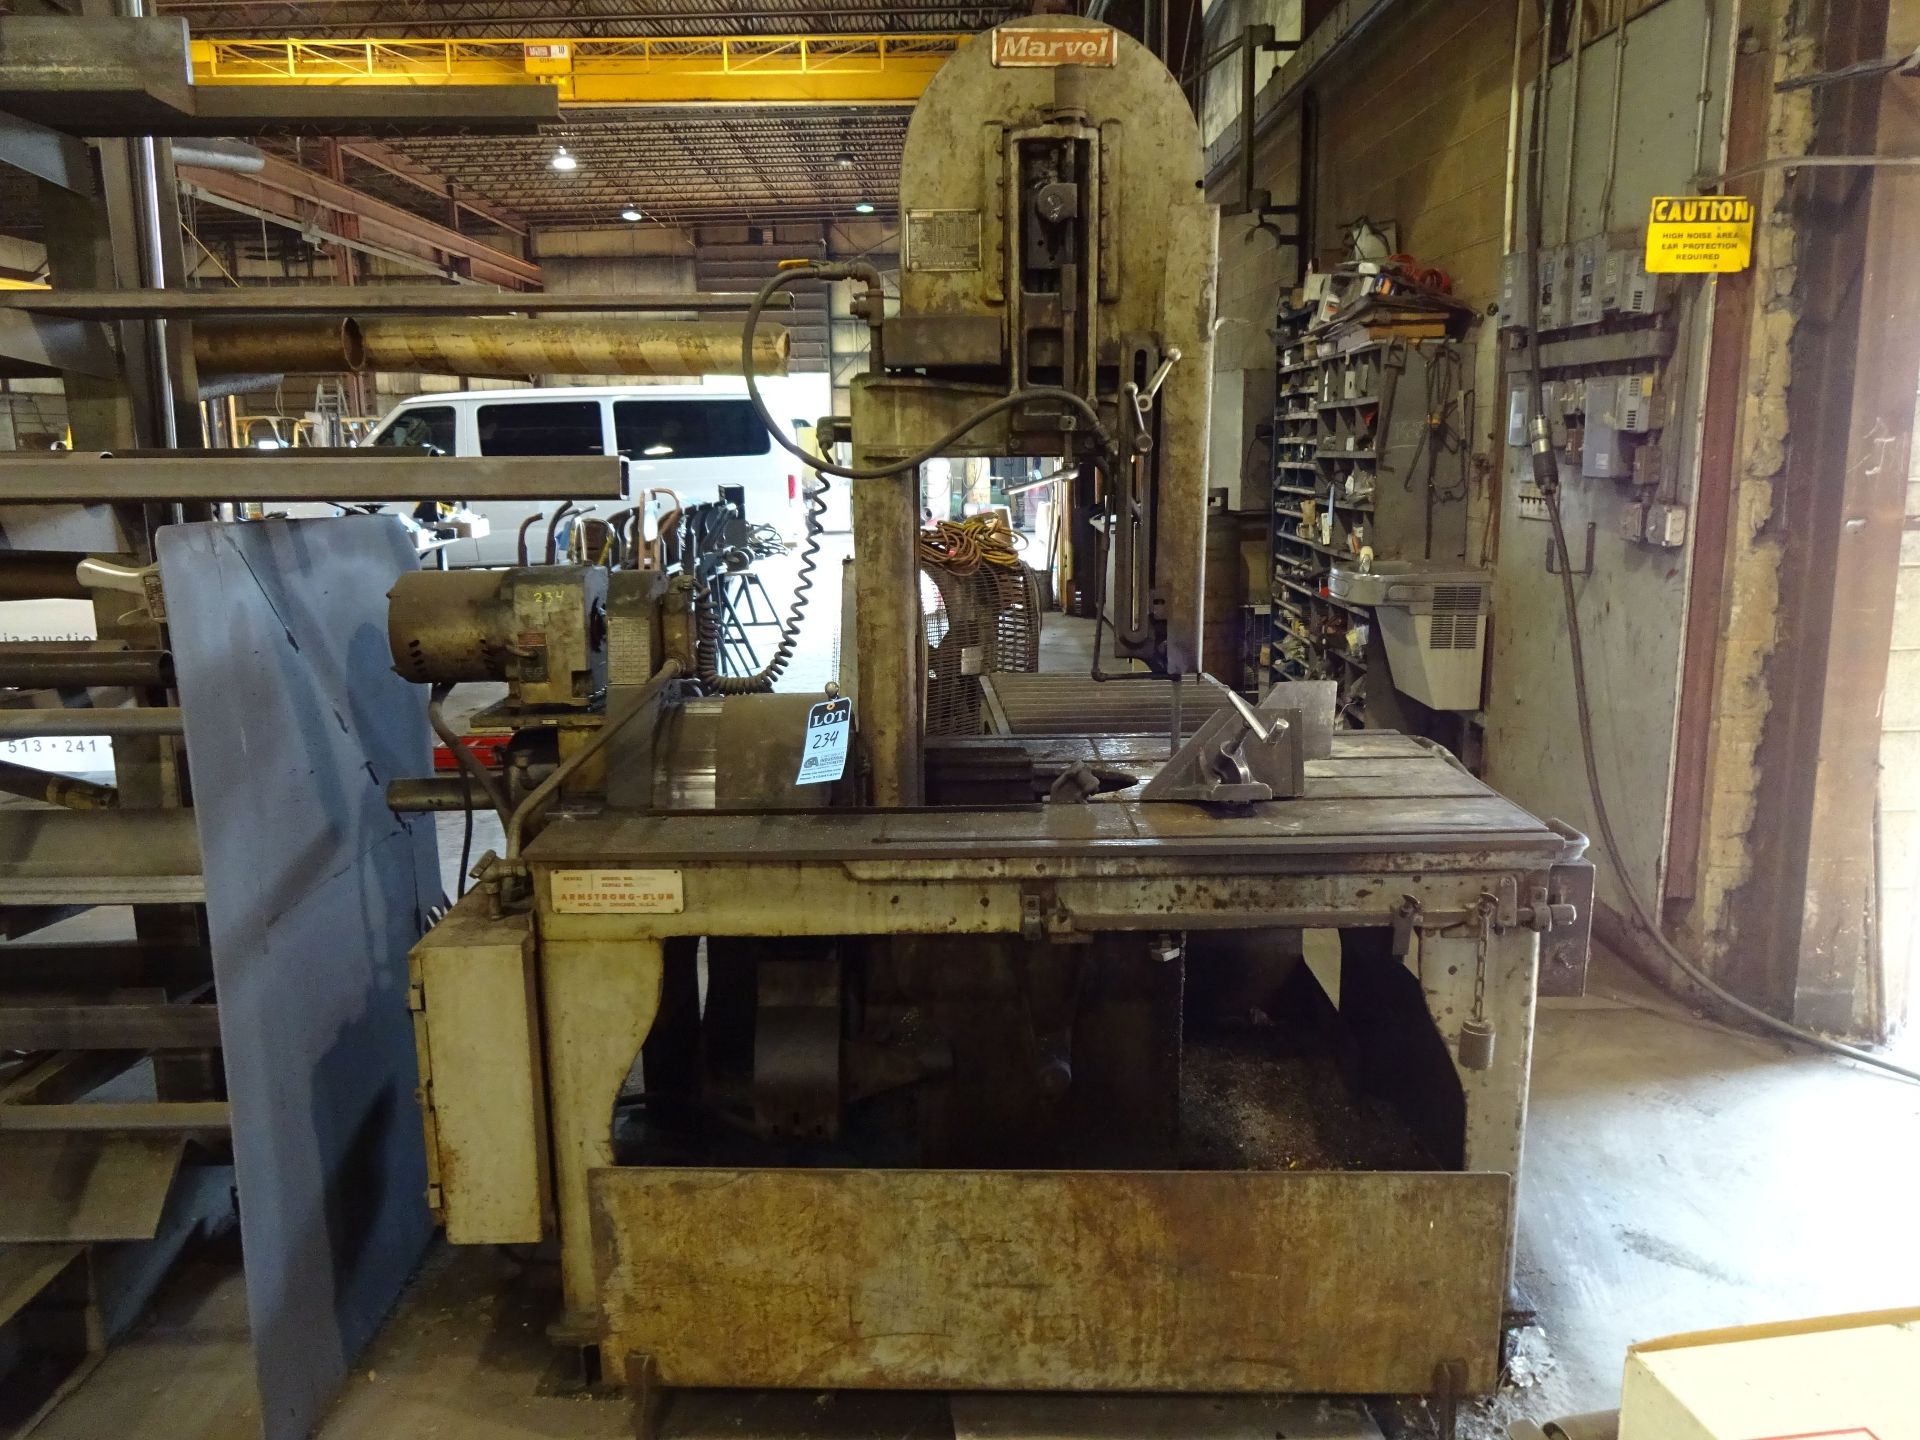 18" X 20" MARVEL SERIES 8/M8/81 VERTICAL BAND SAW; S/N 811948, WITH FEED AND OUT TAKE ROLLER - Image 2 of 8